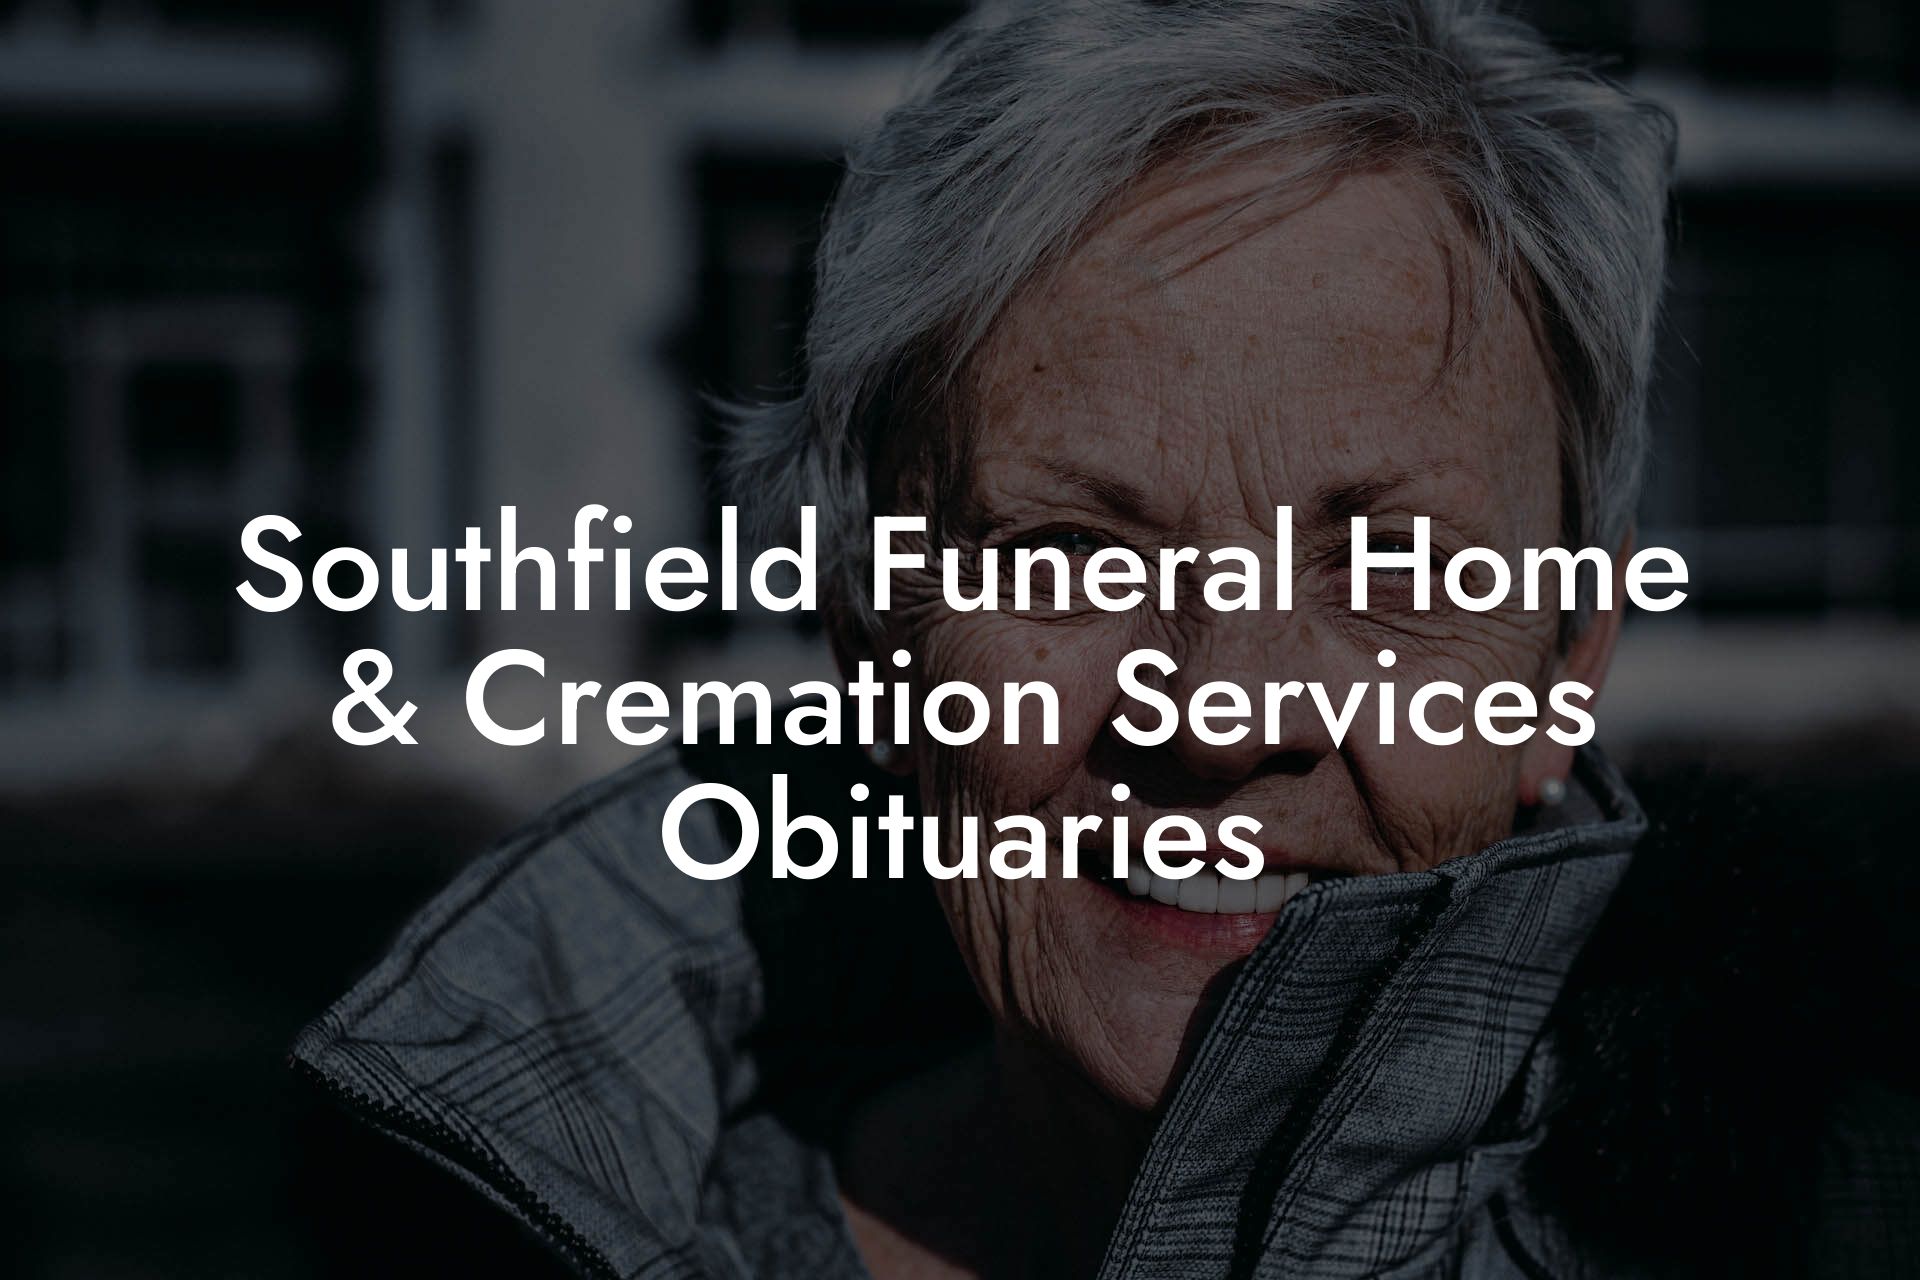 Southfield Funeral Home & Cremation Services Obituaries